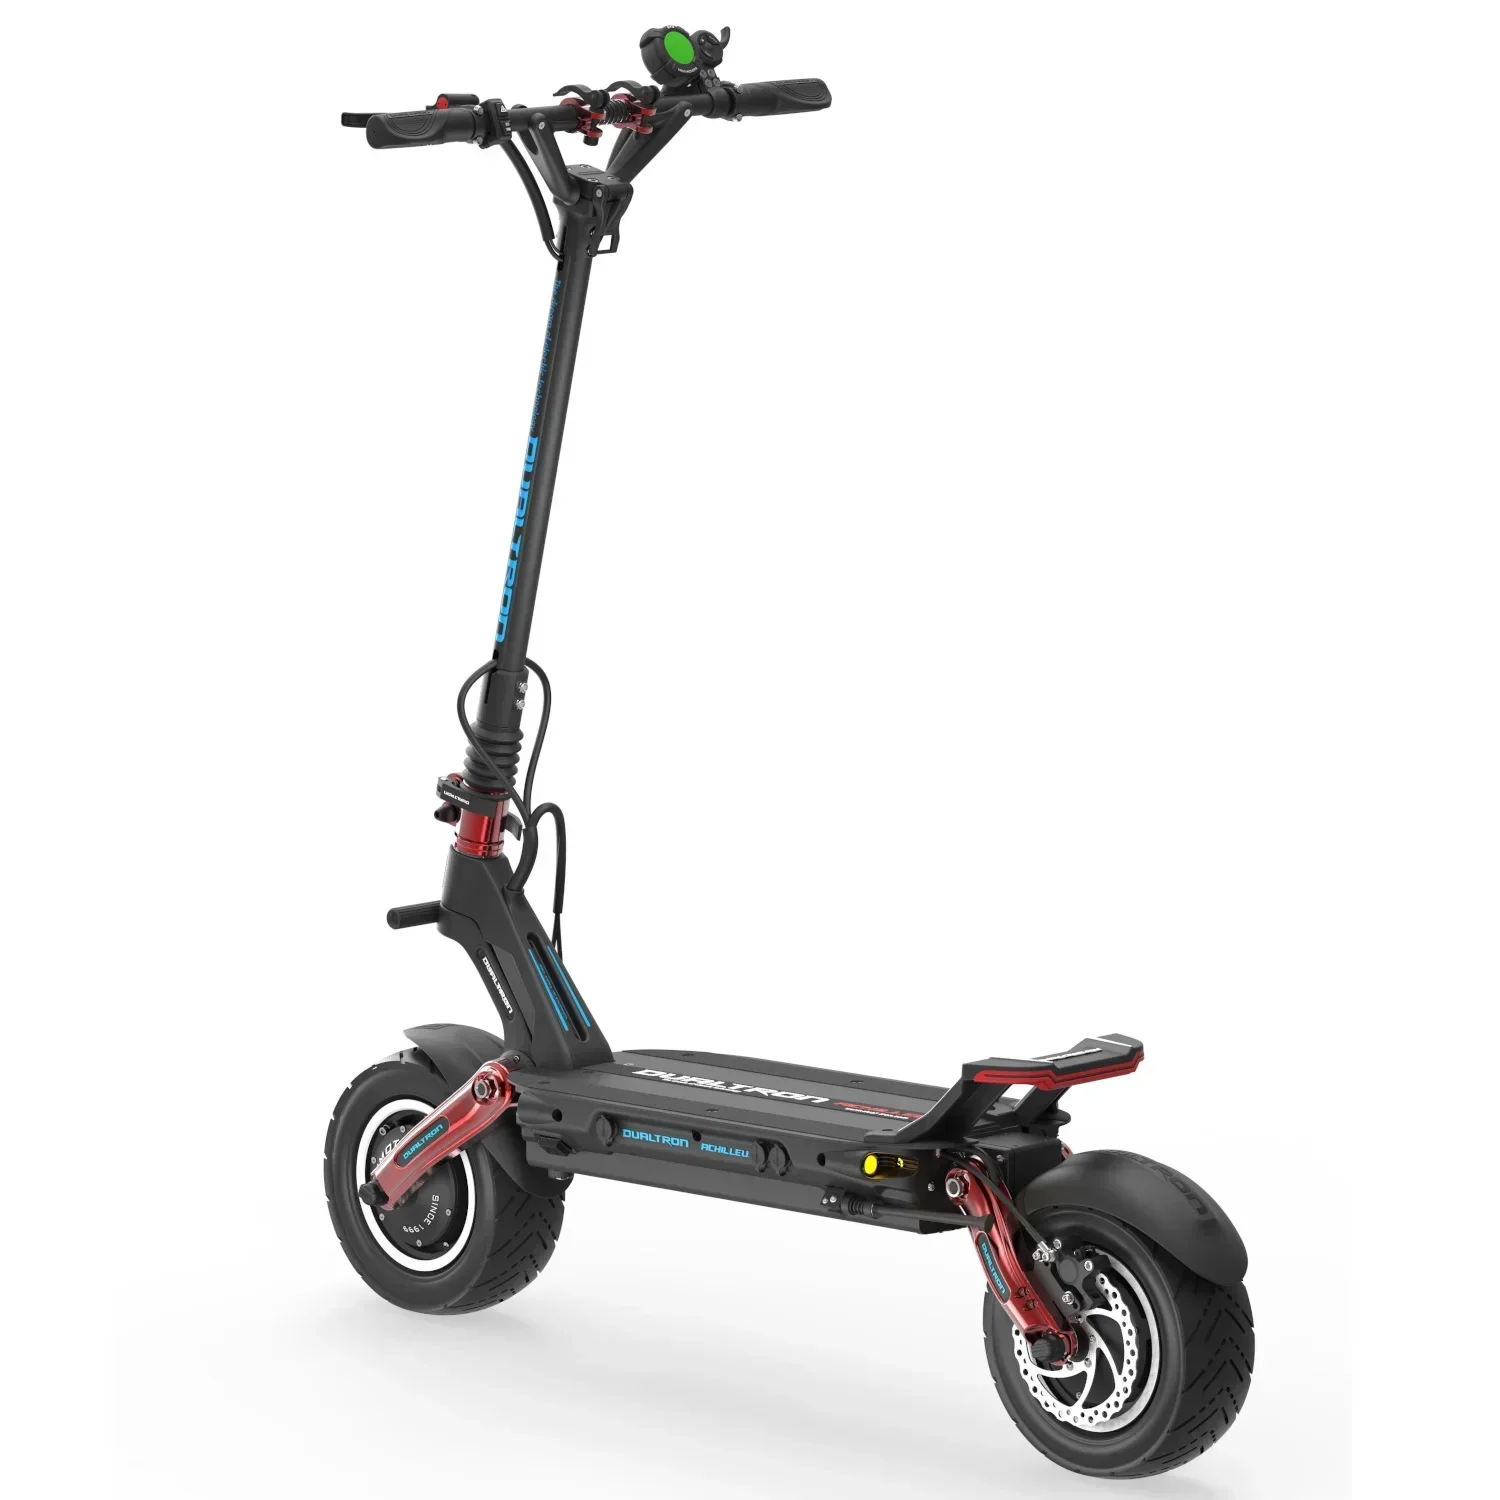 

SUMMER SALES DISCOUNT ON DEAL FOR DUALTRON STORM LTD ELECTRIC SCOOTER